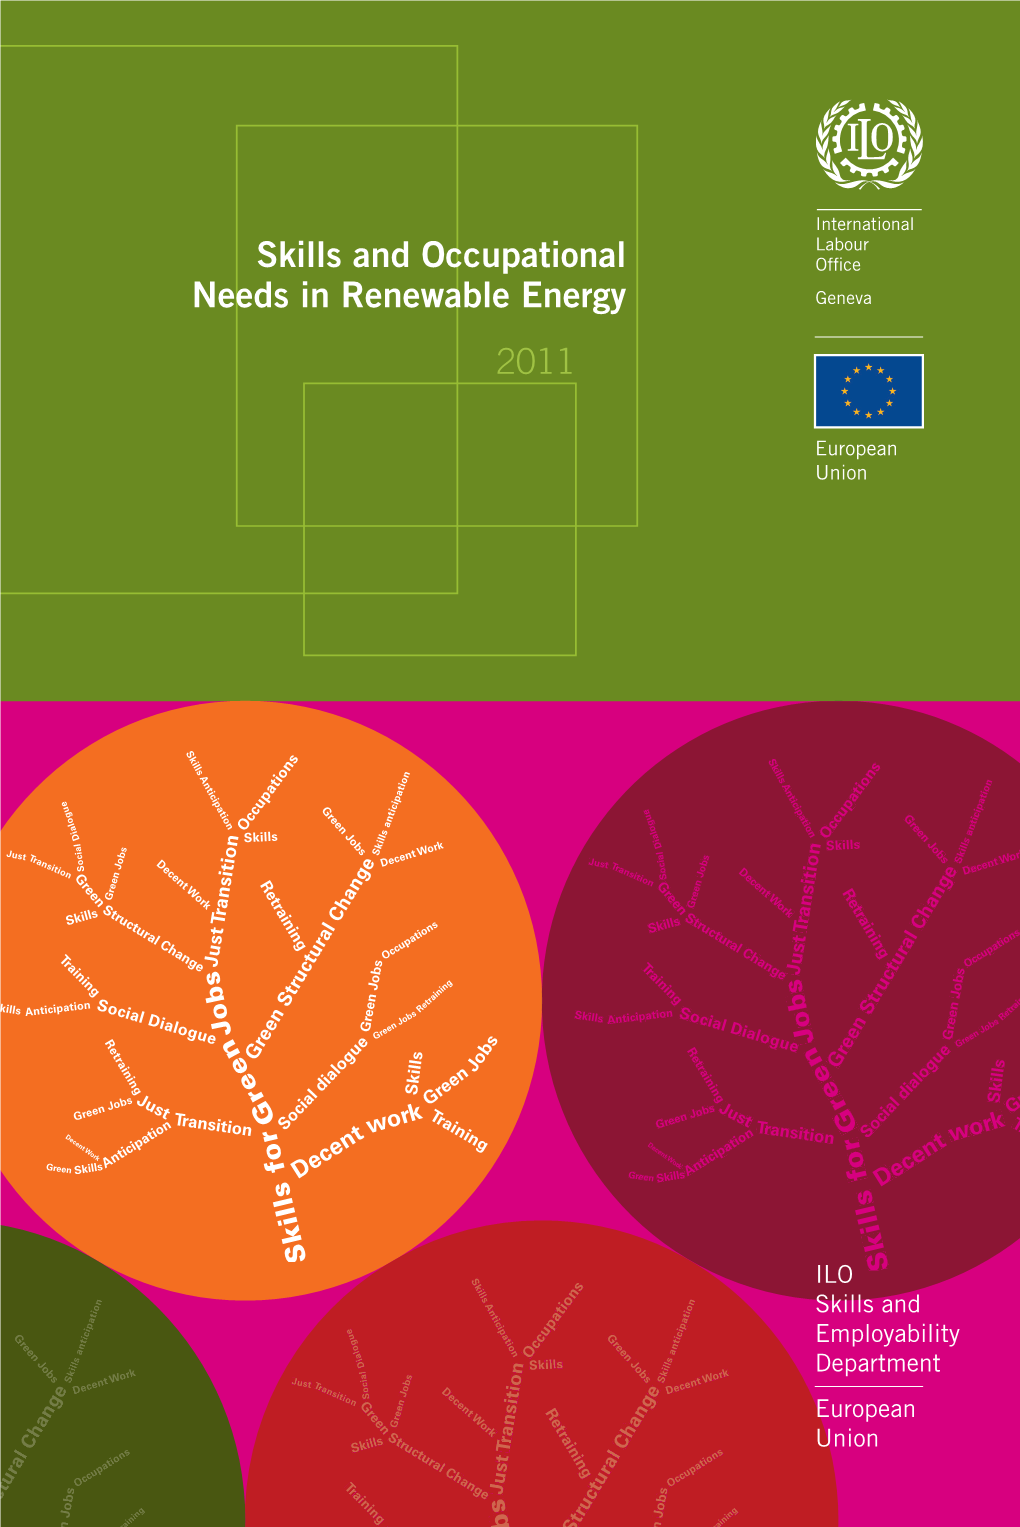 Skills and Occupational Needs in Renewable Energy 2011